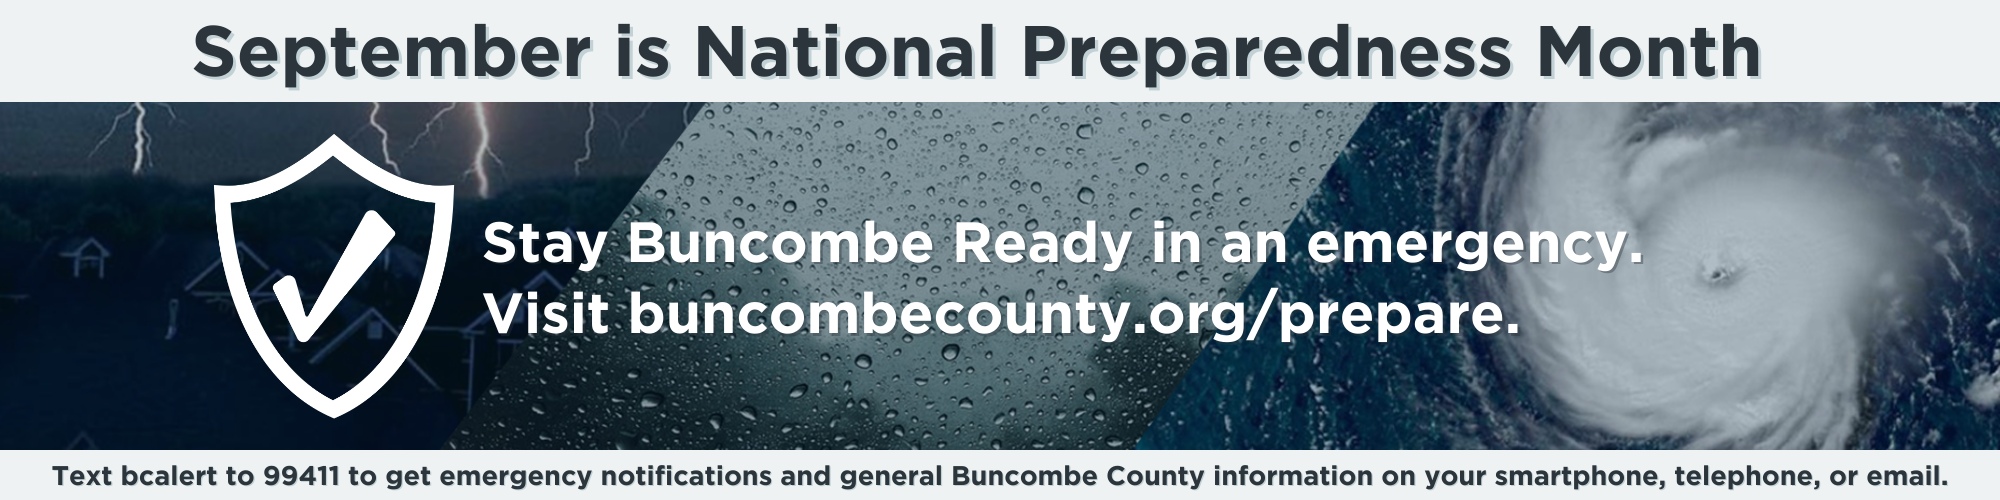 September is National Preparedness Month. Stay Buncombe Ready in a storm. Text bcalert to 99411 to get emergency notifications and general Buncombe County information on your smartphone, telephone, or